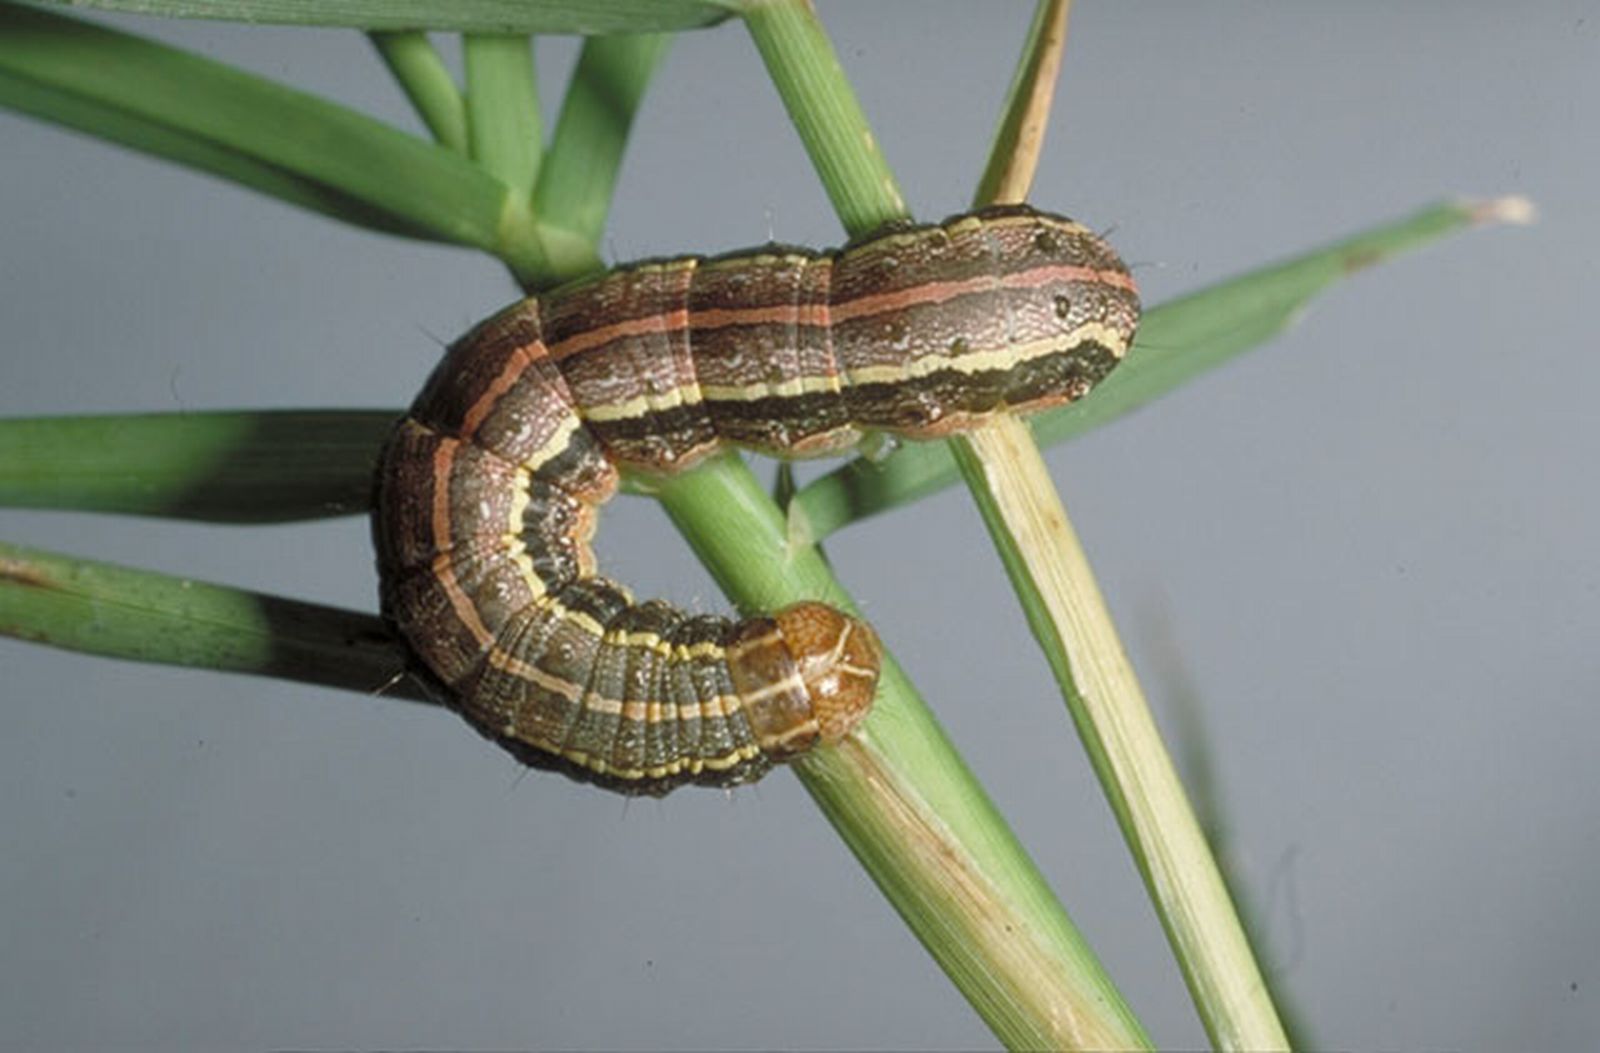 Recent Rainfall Events Cause Armyworms to Thrive by Dr. Mario A. Villarino, County Extension Agent for Agriculture and Natural Resources